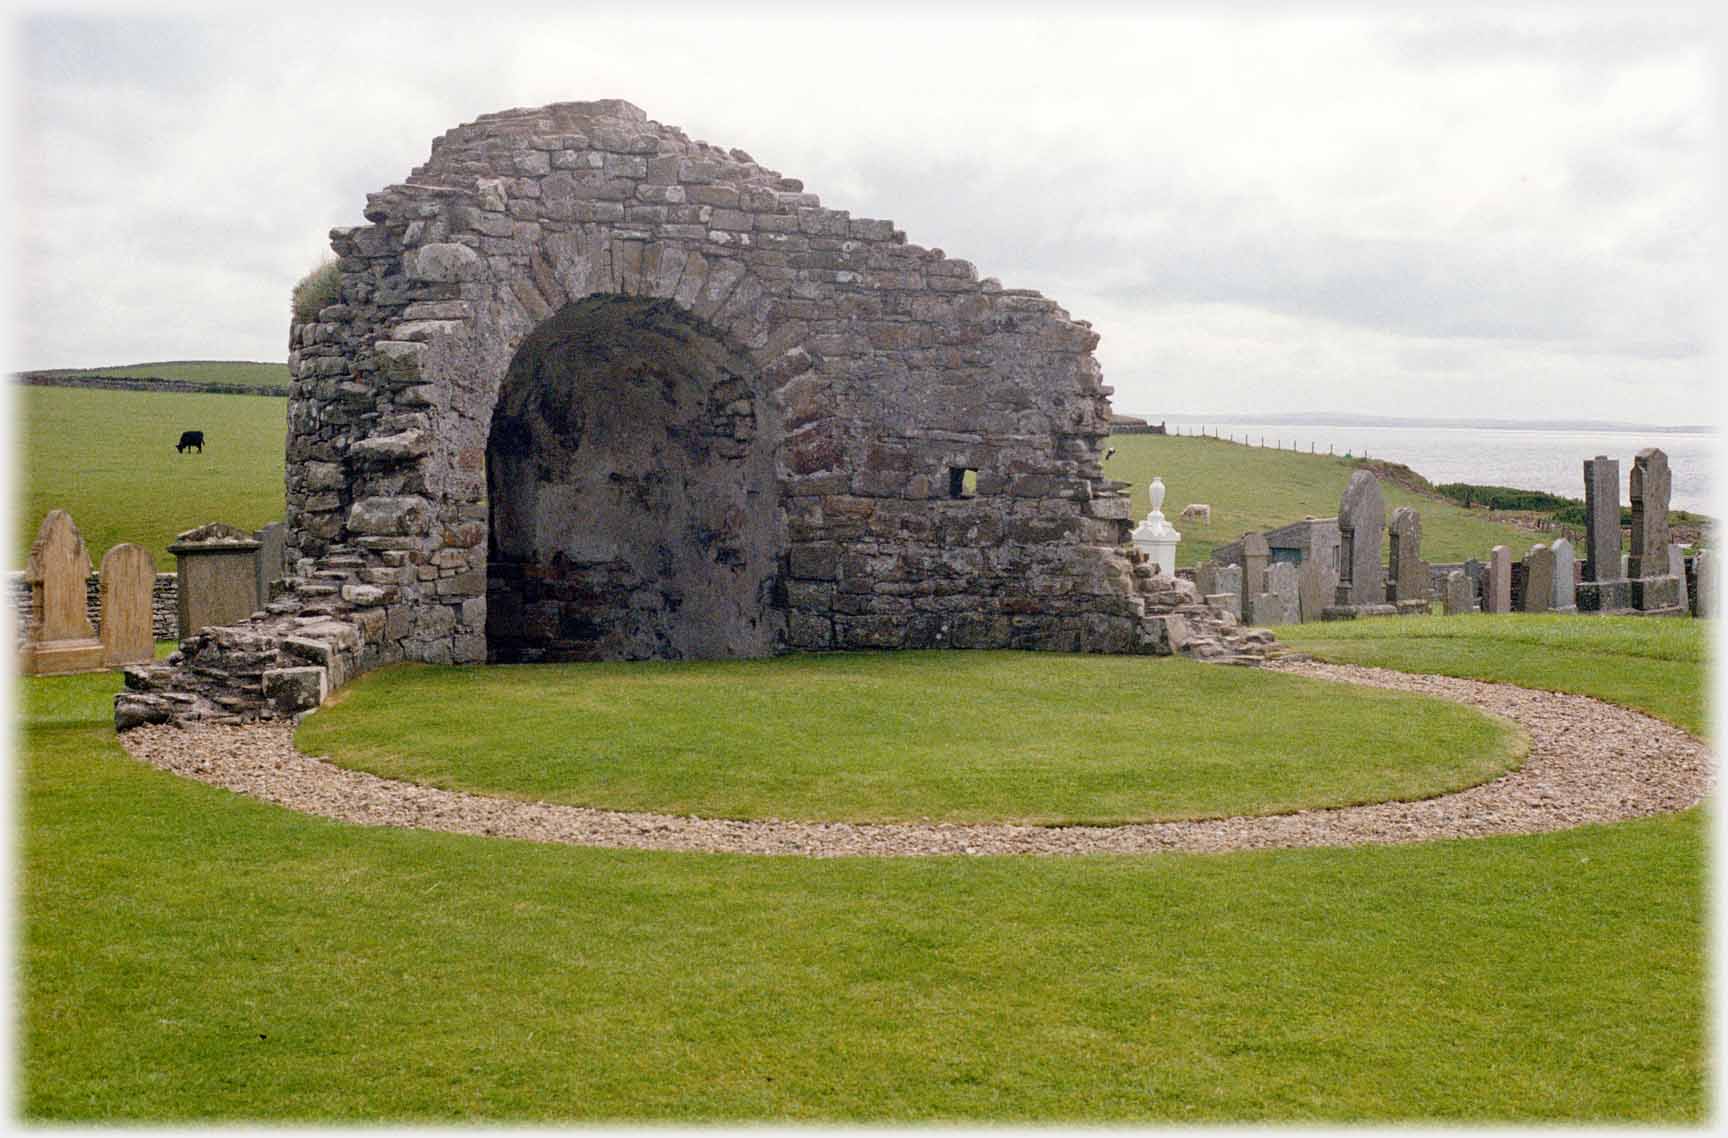 Standing section of the wall of circular kirk.